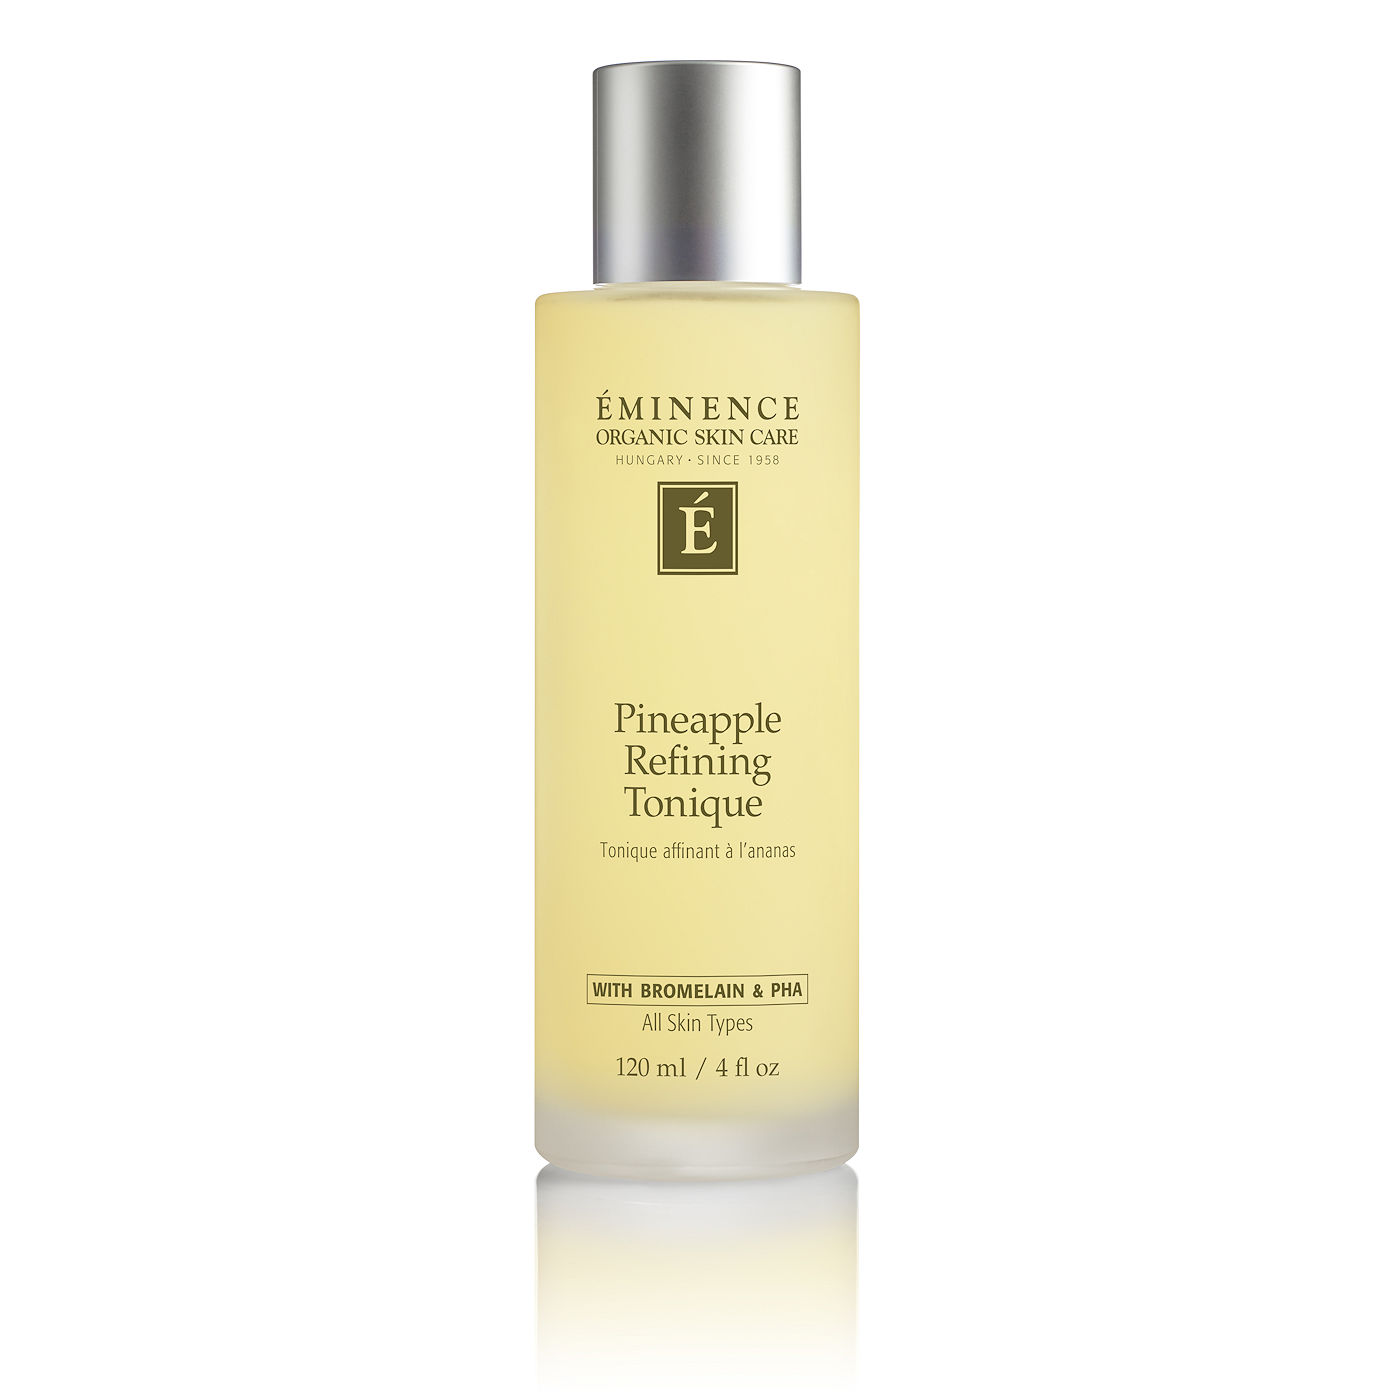 Pineapple Refining Tonique - Eminence Organic Skin Care from The Spa Within in Detroit Lakes, MN 